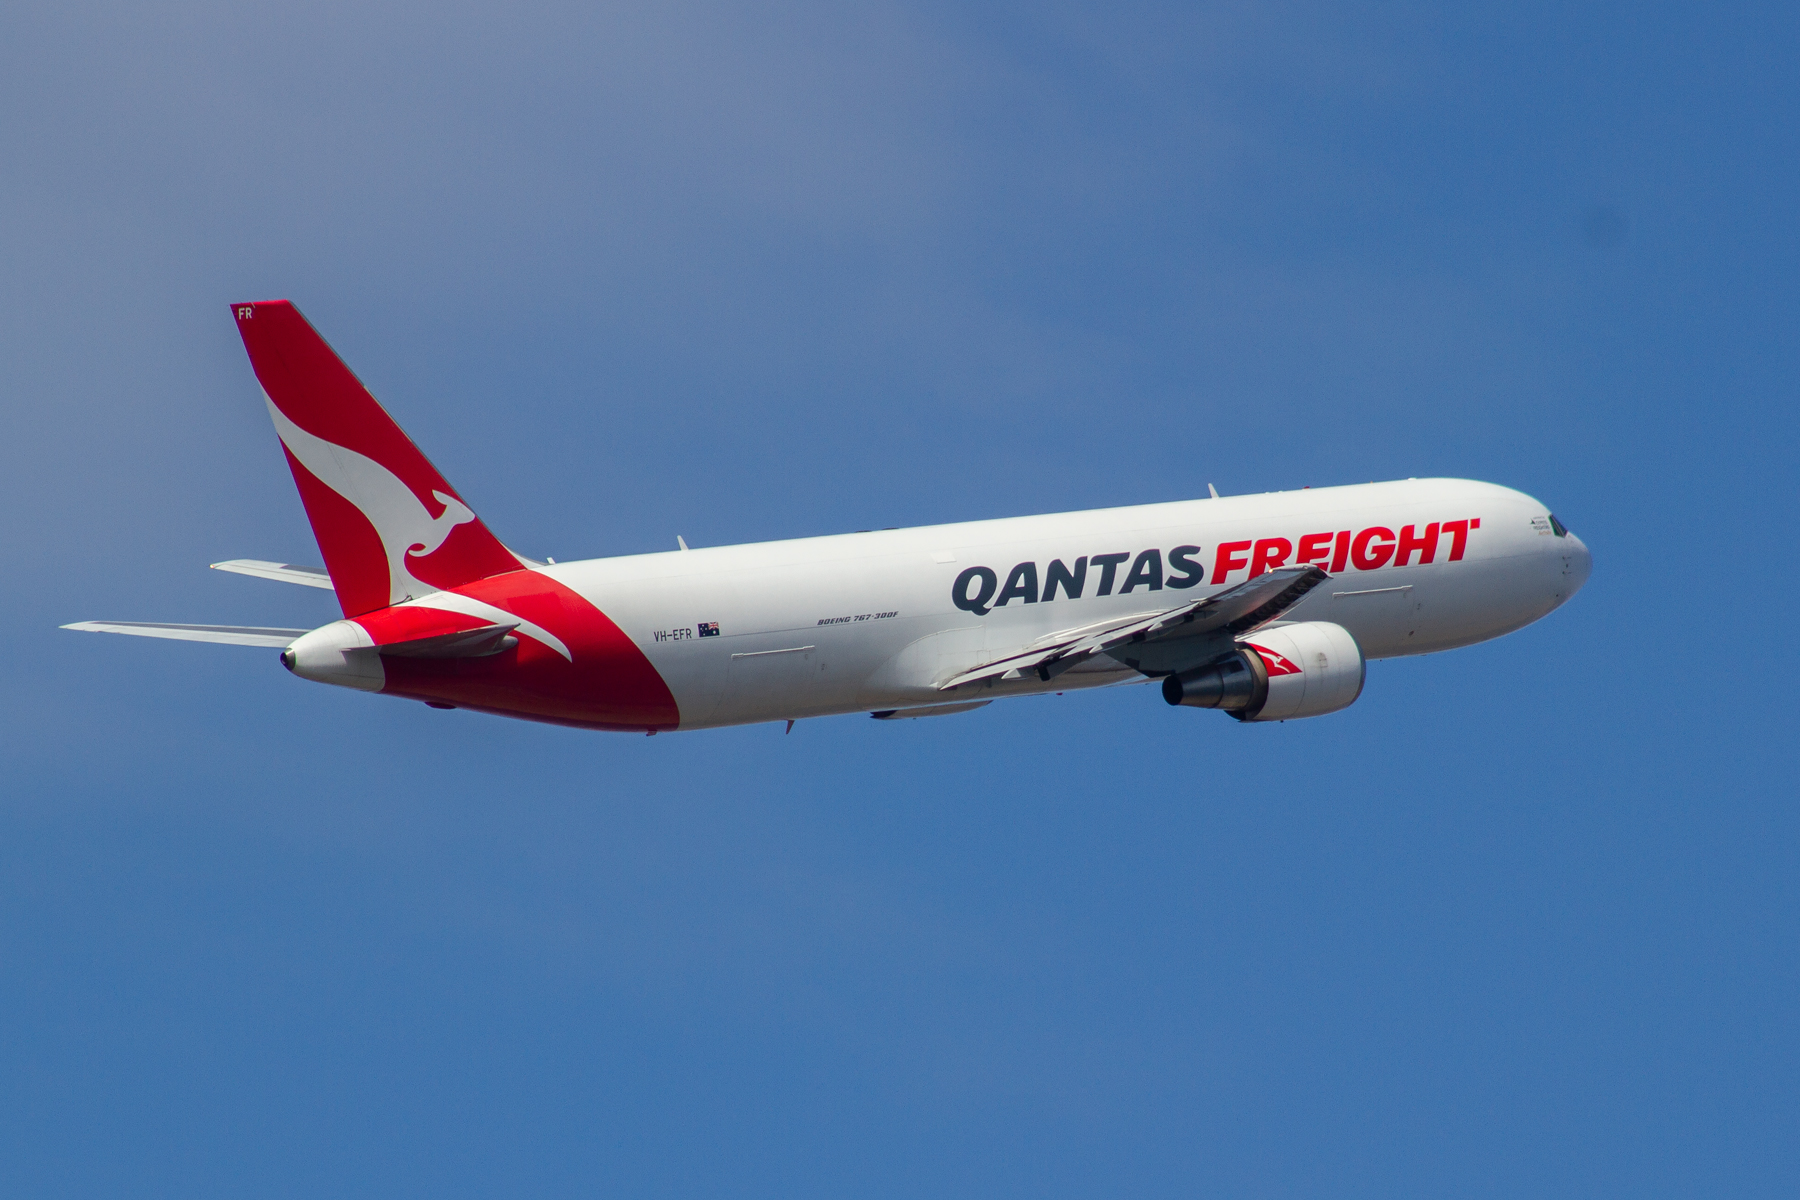 Express Freighters Australia Boeing 767-300F VH-EFR at Kingsford Smith